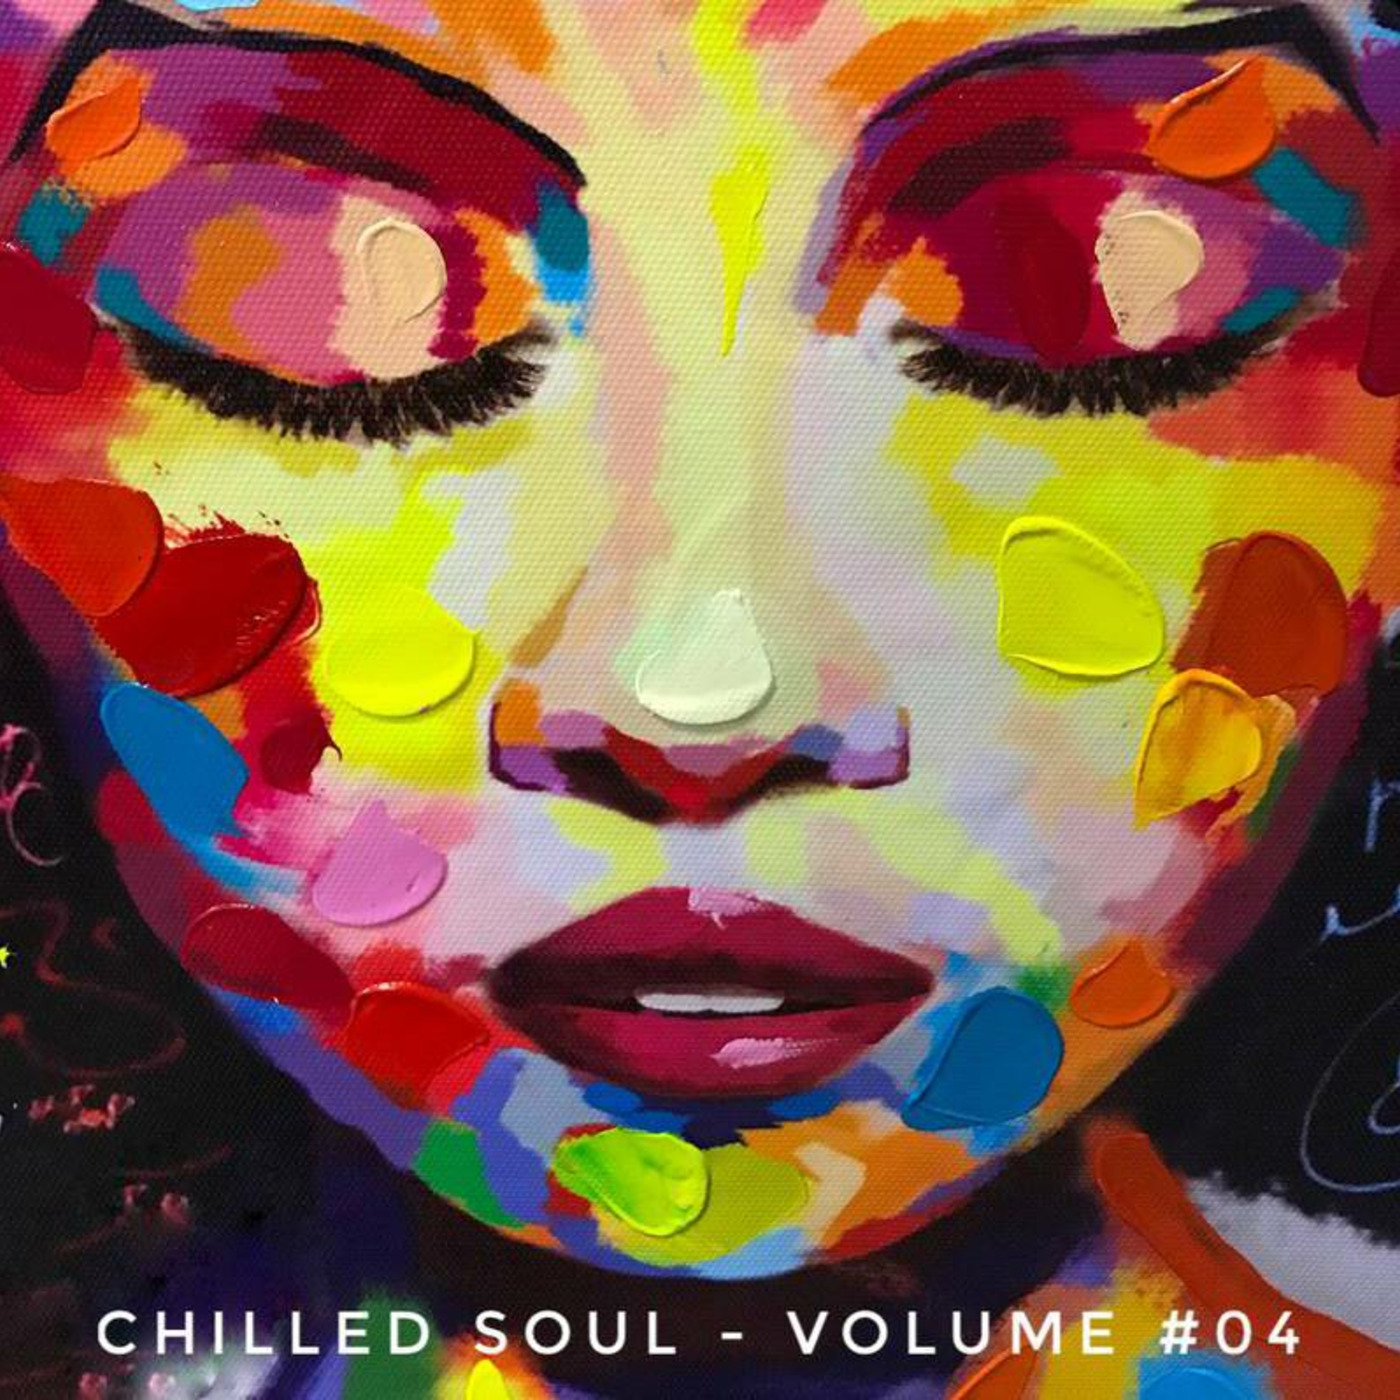 Chilled Soul #04 - Iain Willis